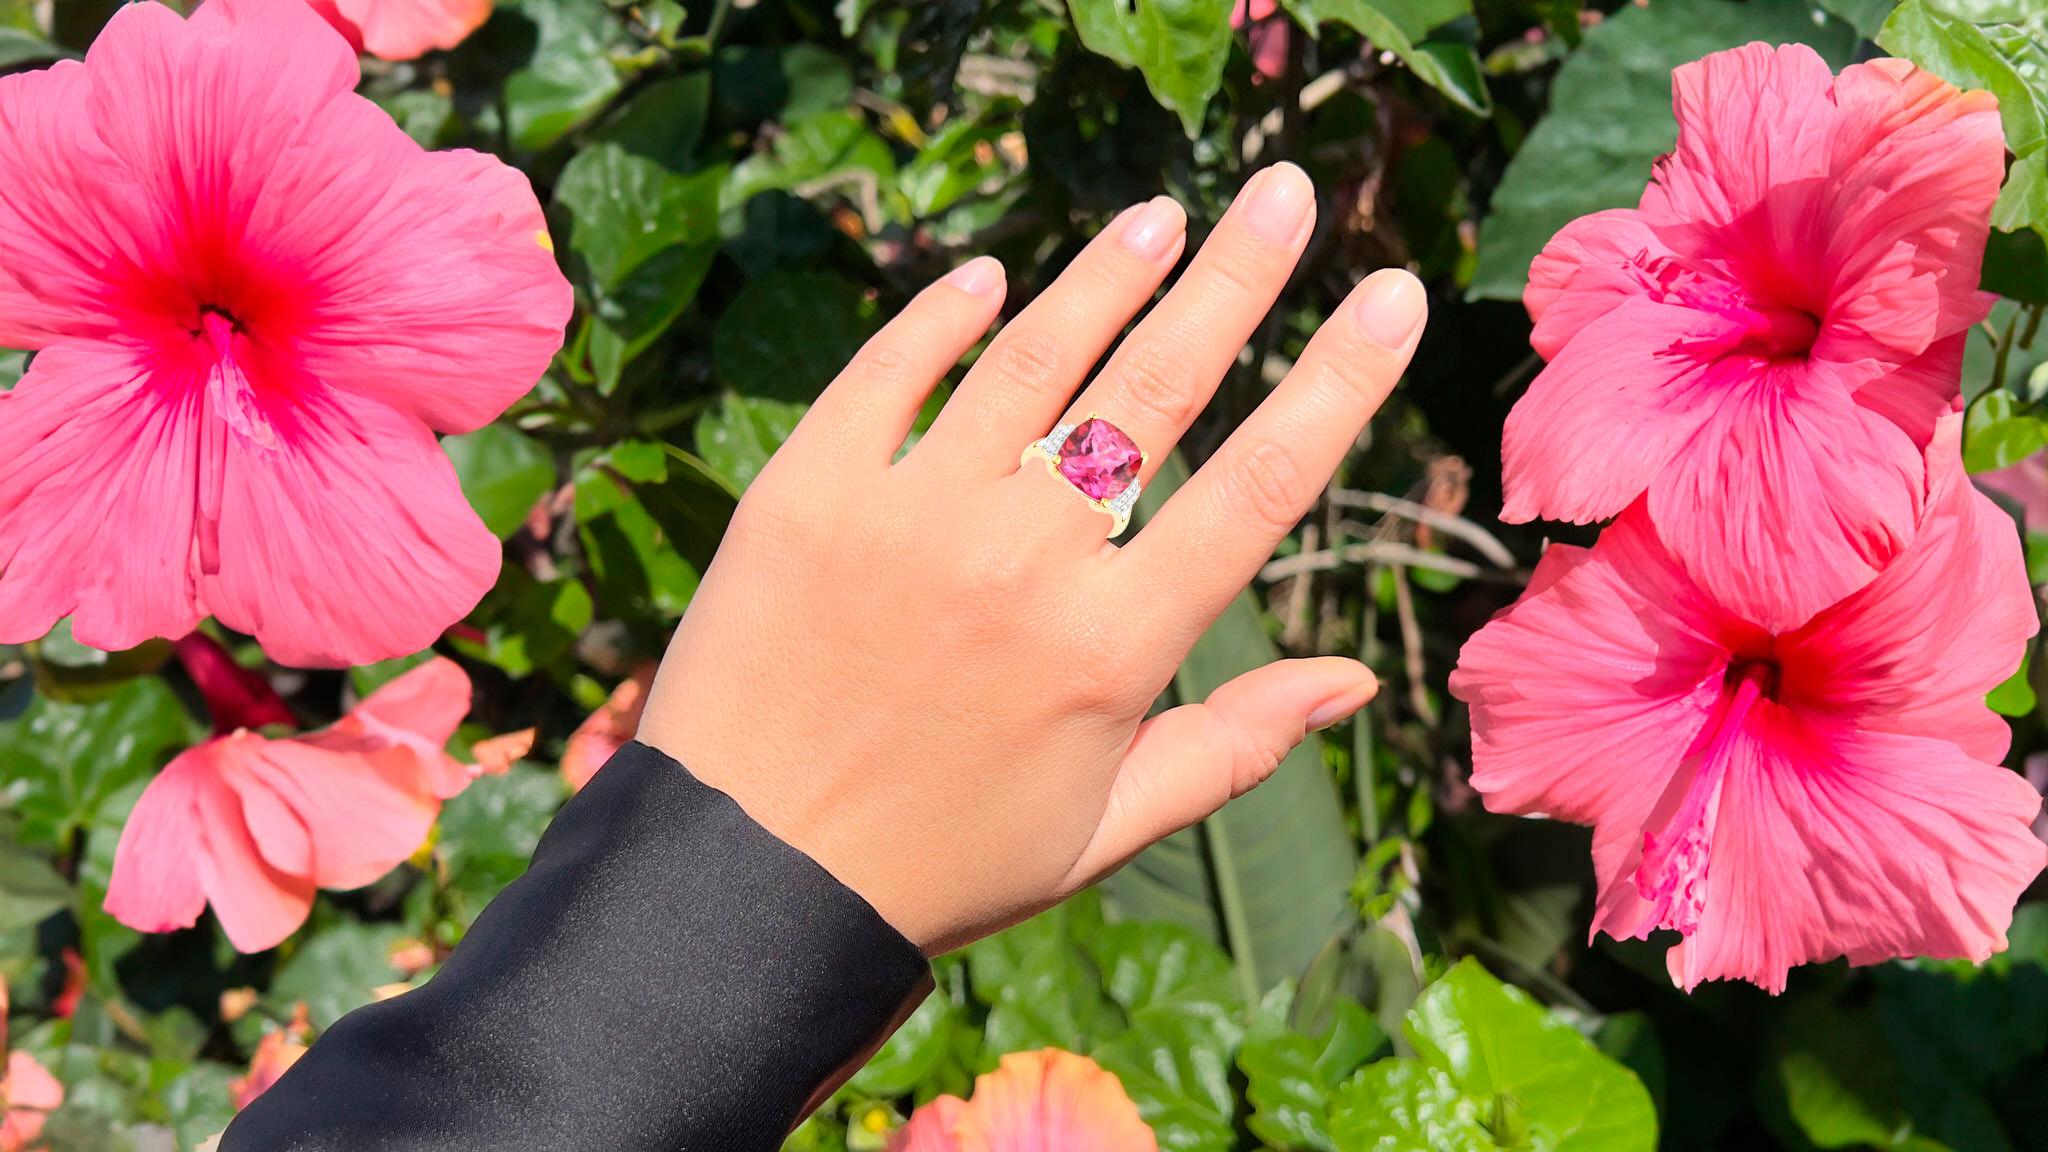 It comes with the Gemological Appraisal by GIA GG/AJP
All Gemstones are Natural
Hot Pink Topaz = 9.15 Carats
18 Diamonds = 0.10 Carats
Metal: 18K Yellow Gold Plated Sterling Silver
Ring Size: 9* US
*It can be resized complimentary